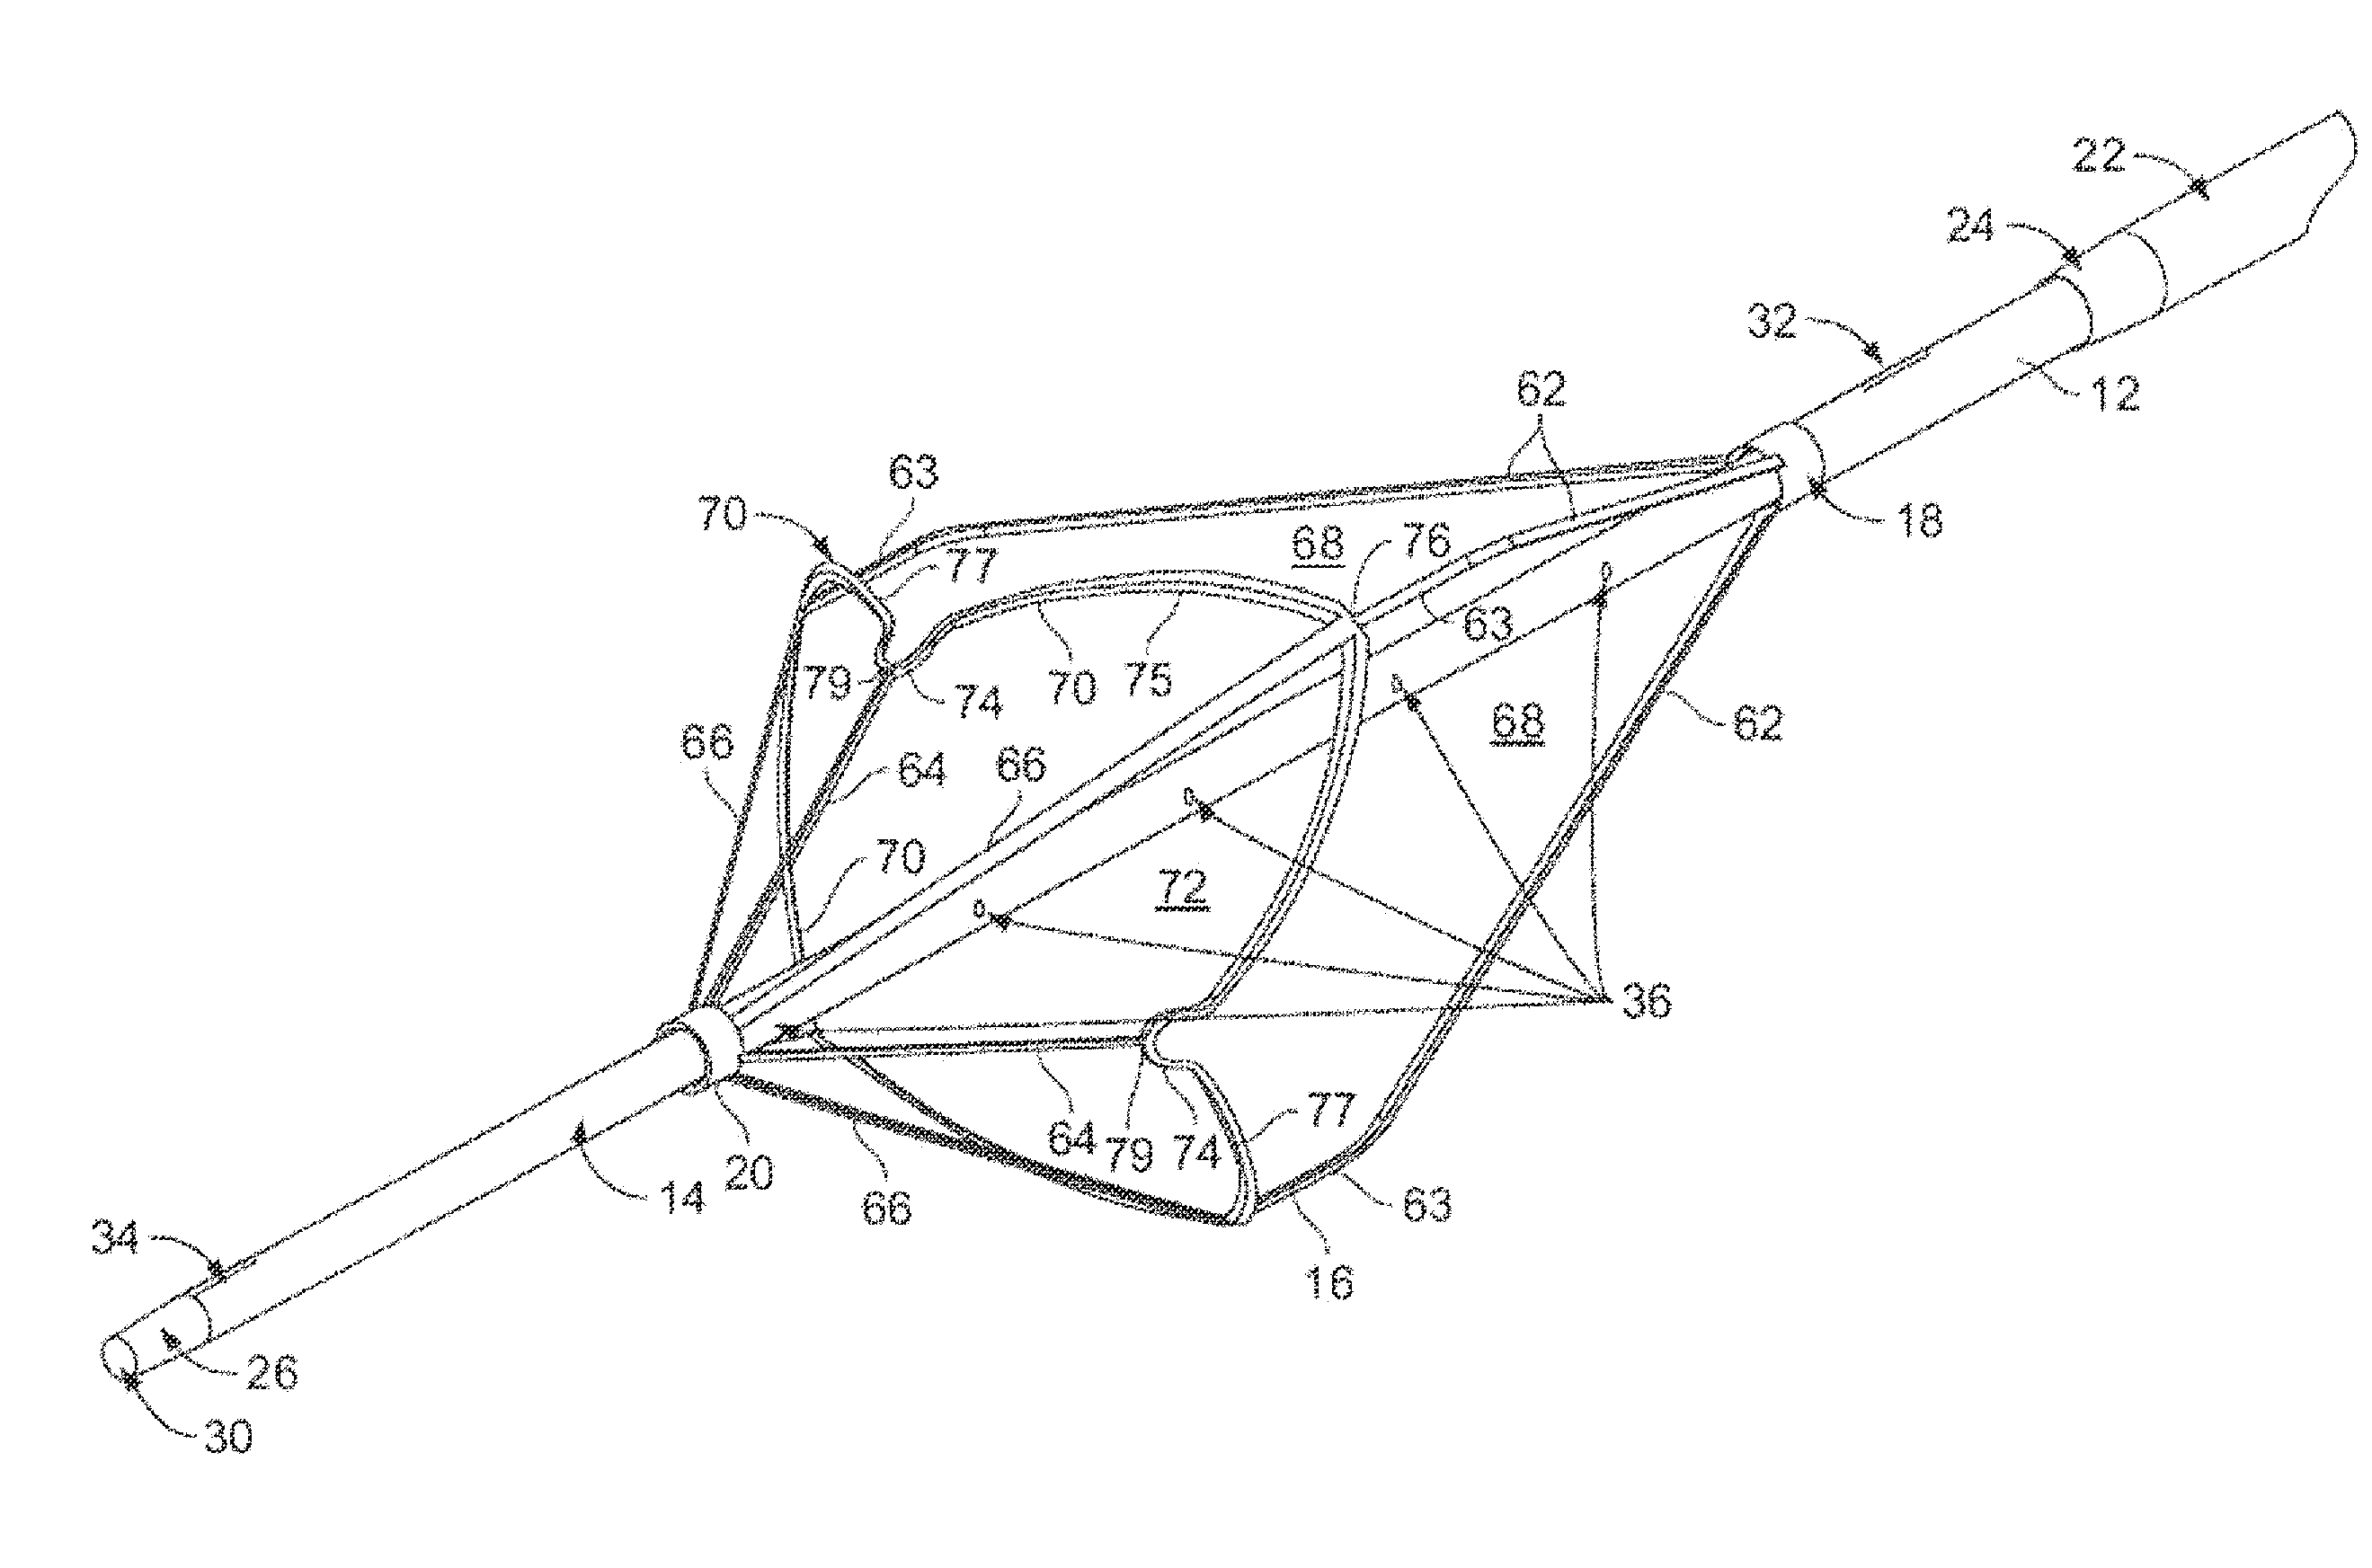 Covered filter catheter apparatus and method of using same